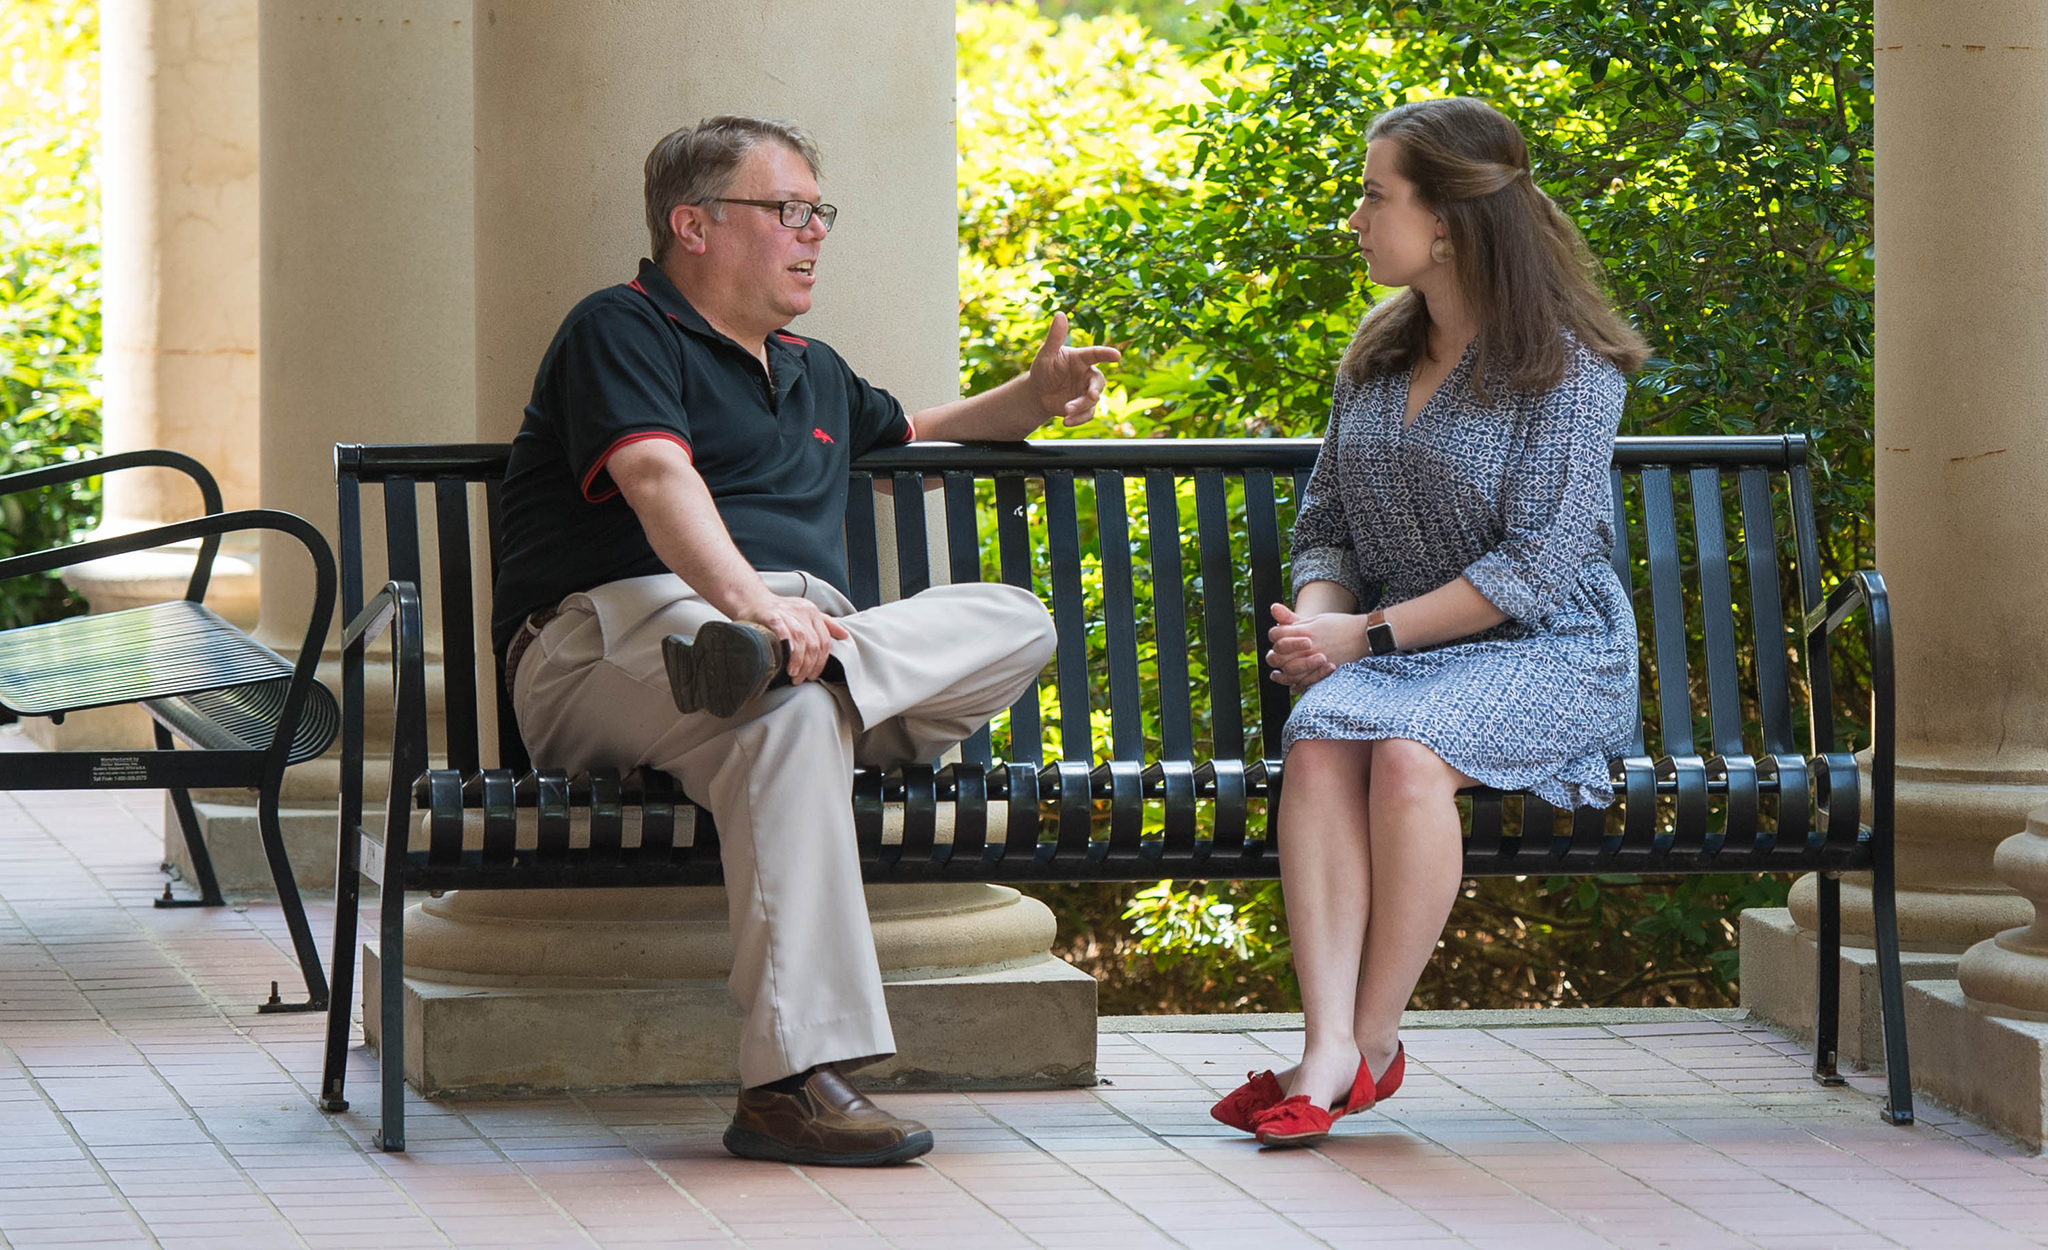 Daniel O’Sullivan (left), UM chair and professor of modern languages, chats with a student. Photo by Kevin Bain/Ole Miss Digital Imaging Services